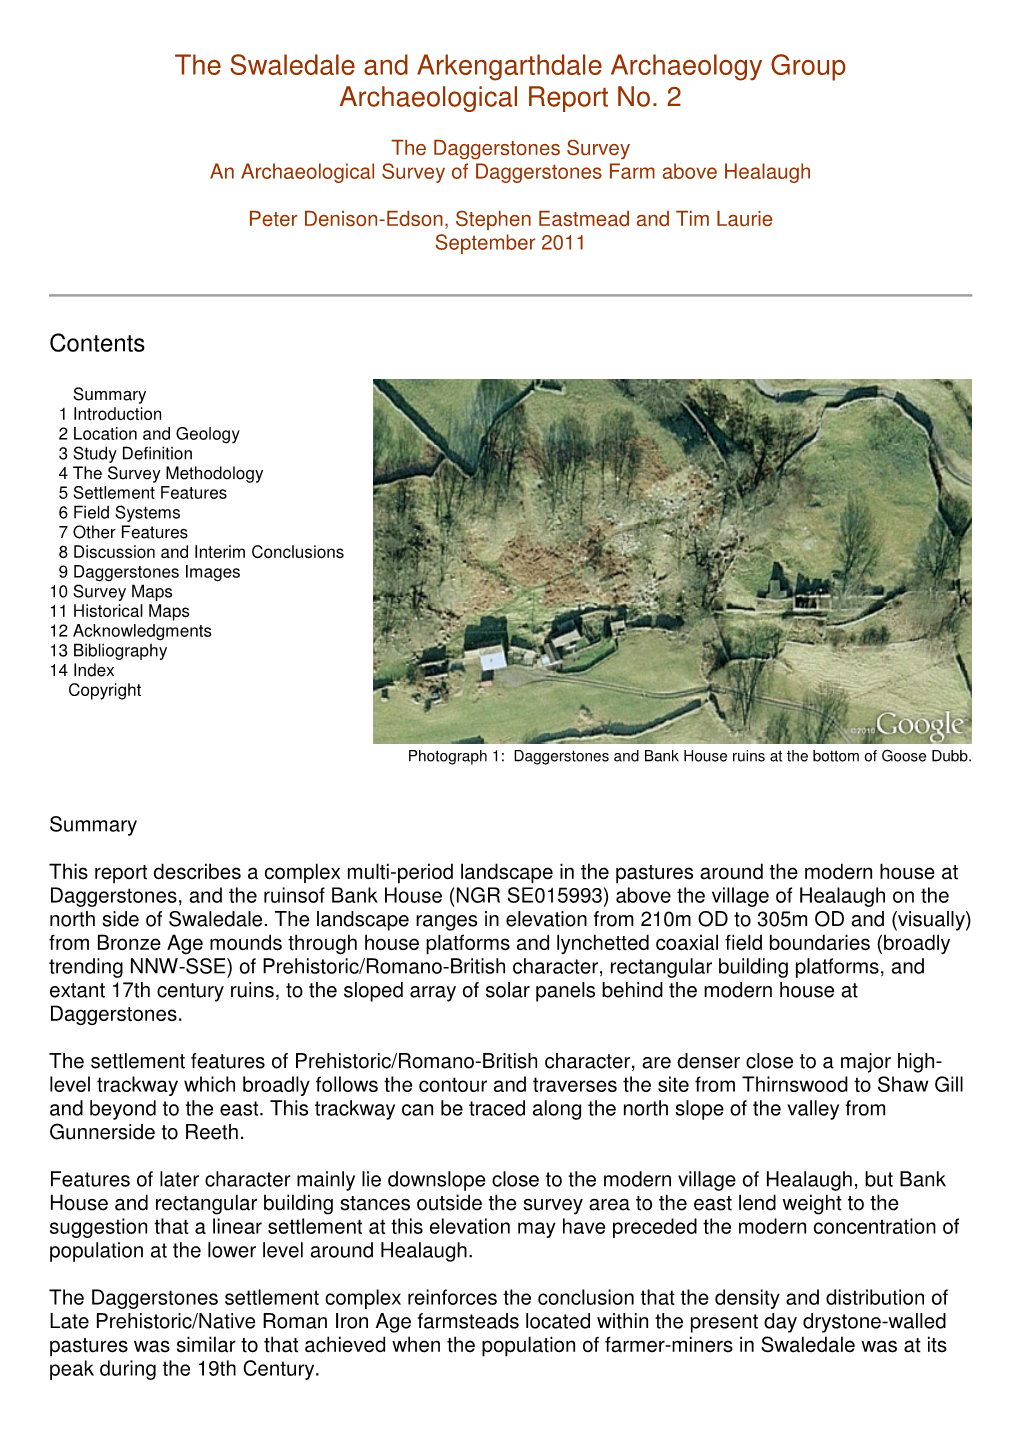 The Swaledale and Arkengarthdale Archaeology Group Archaeological Report No